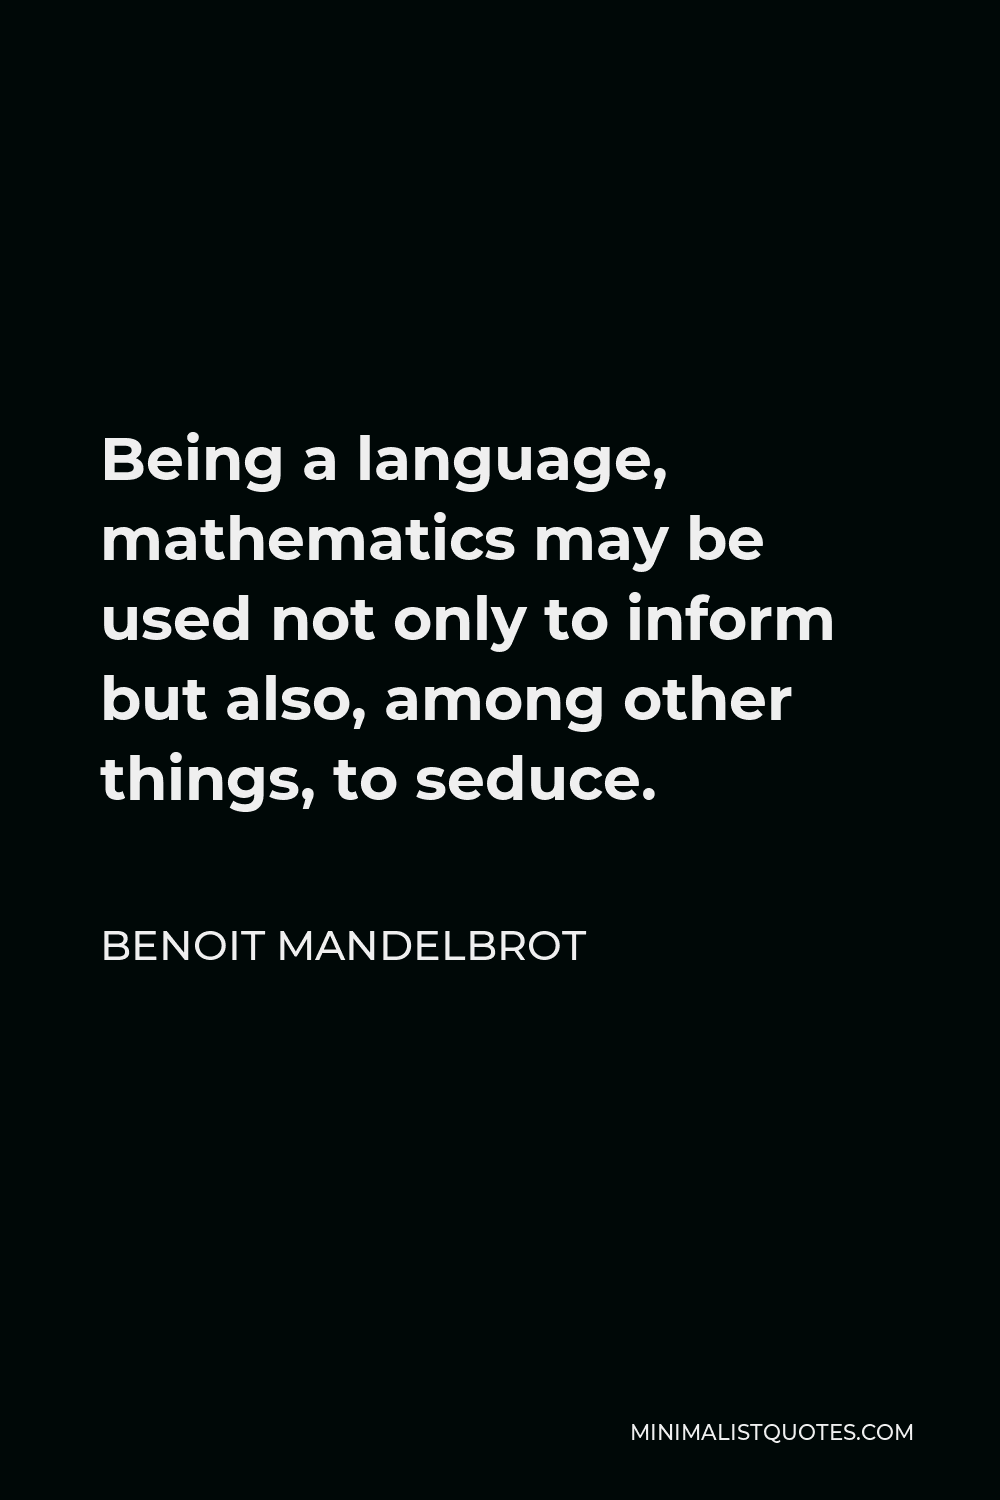 Benoit Mandelbrot Quote - Being a language, mathematics may be used not only to inform but also, among other things, to seduce.